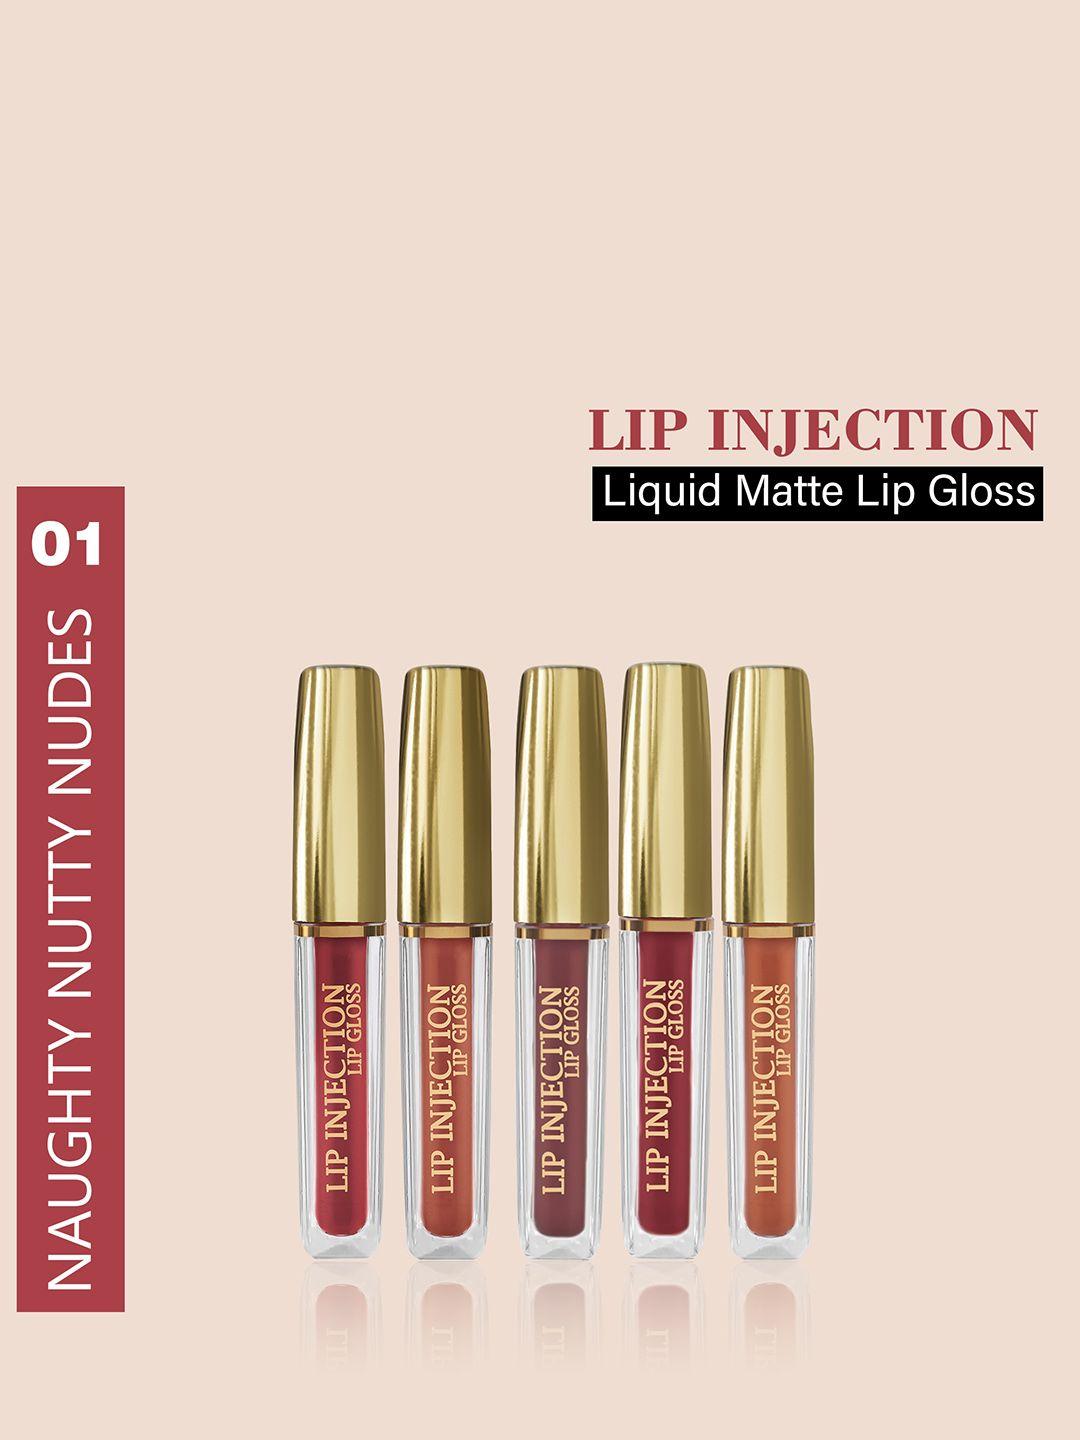 incolor-lip-injection-set-of-5-lip-gloss---4ml---naughty-nutty-nudes-01---03-11-17-07-05